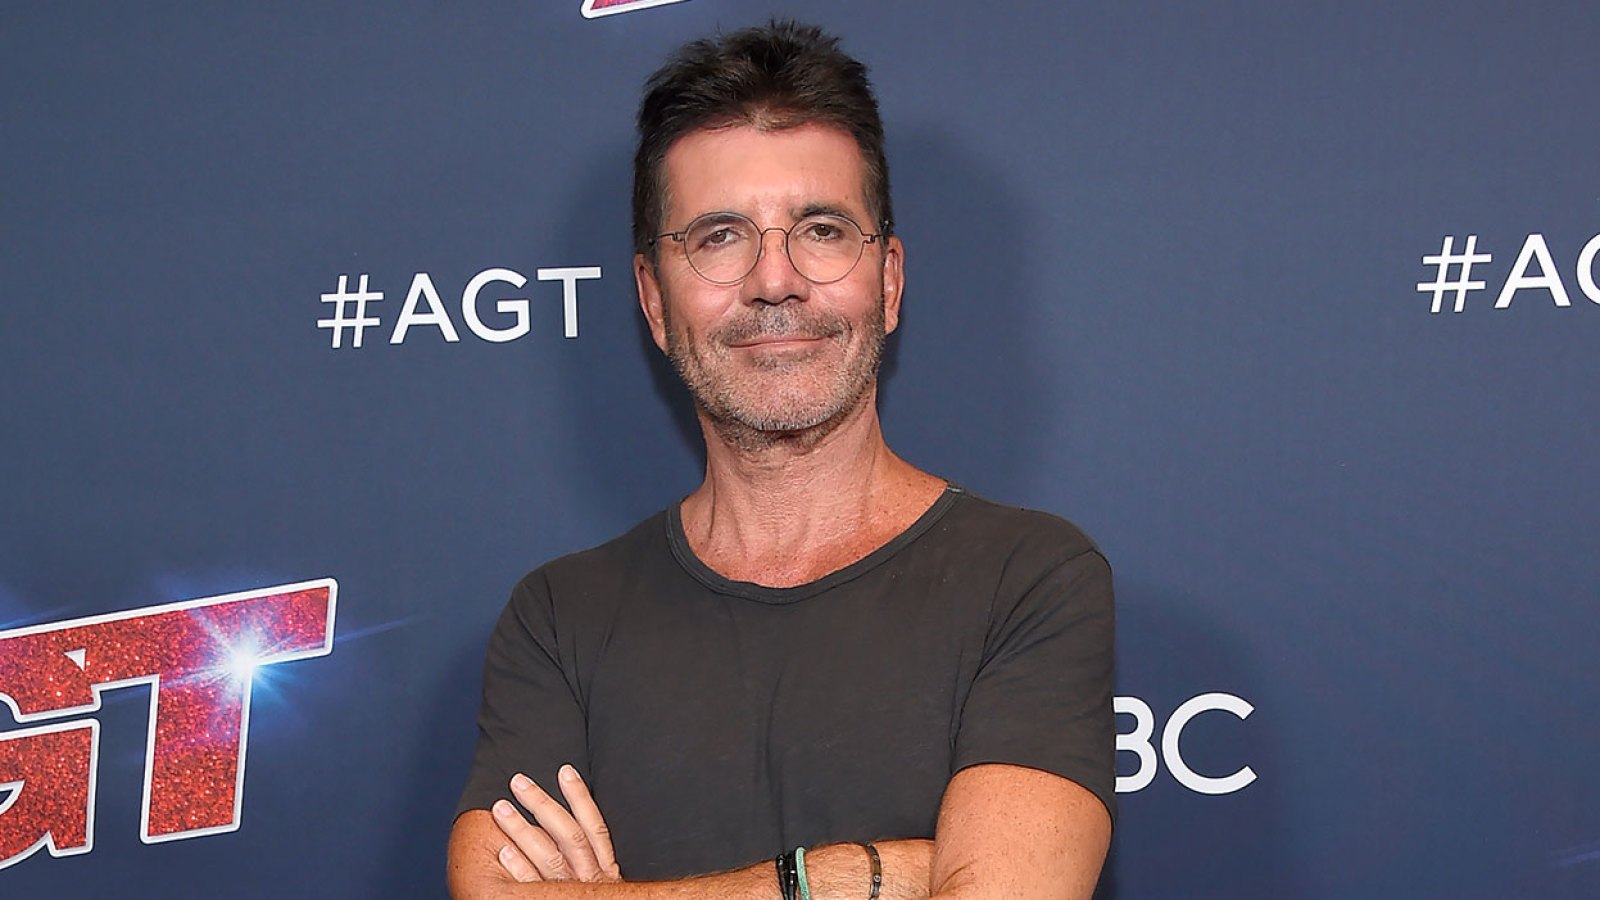 Simon Cowell Is Up and Walking Amid Recovery From Back Injury